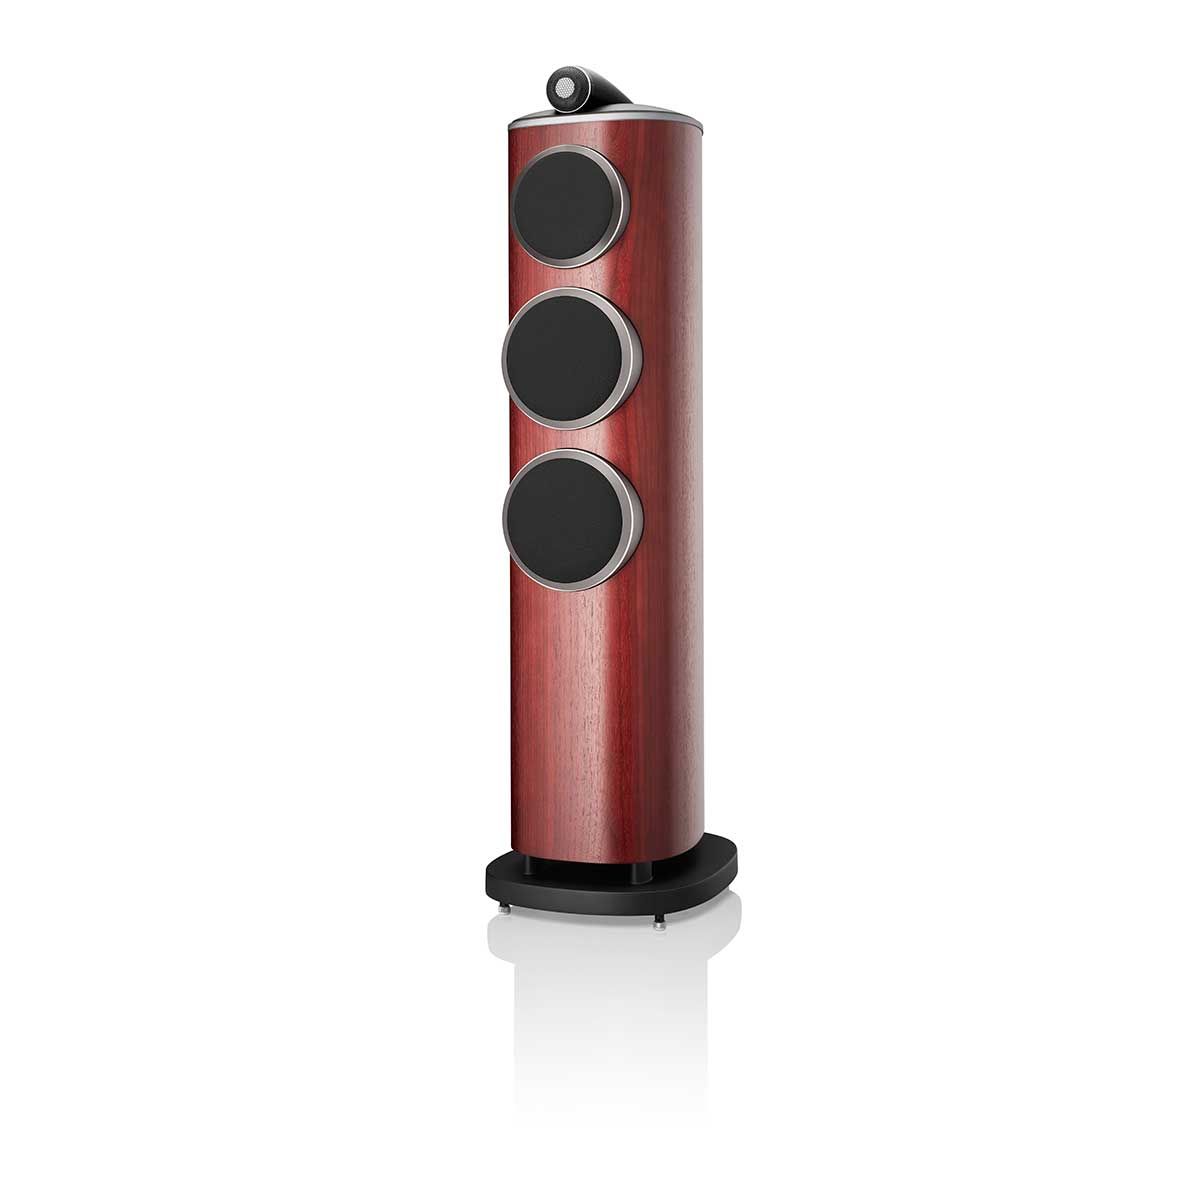 Bowers & Wilkins 804 D4 Floorstanding Speaker, Satin Rosenut, front angle with grille